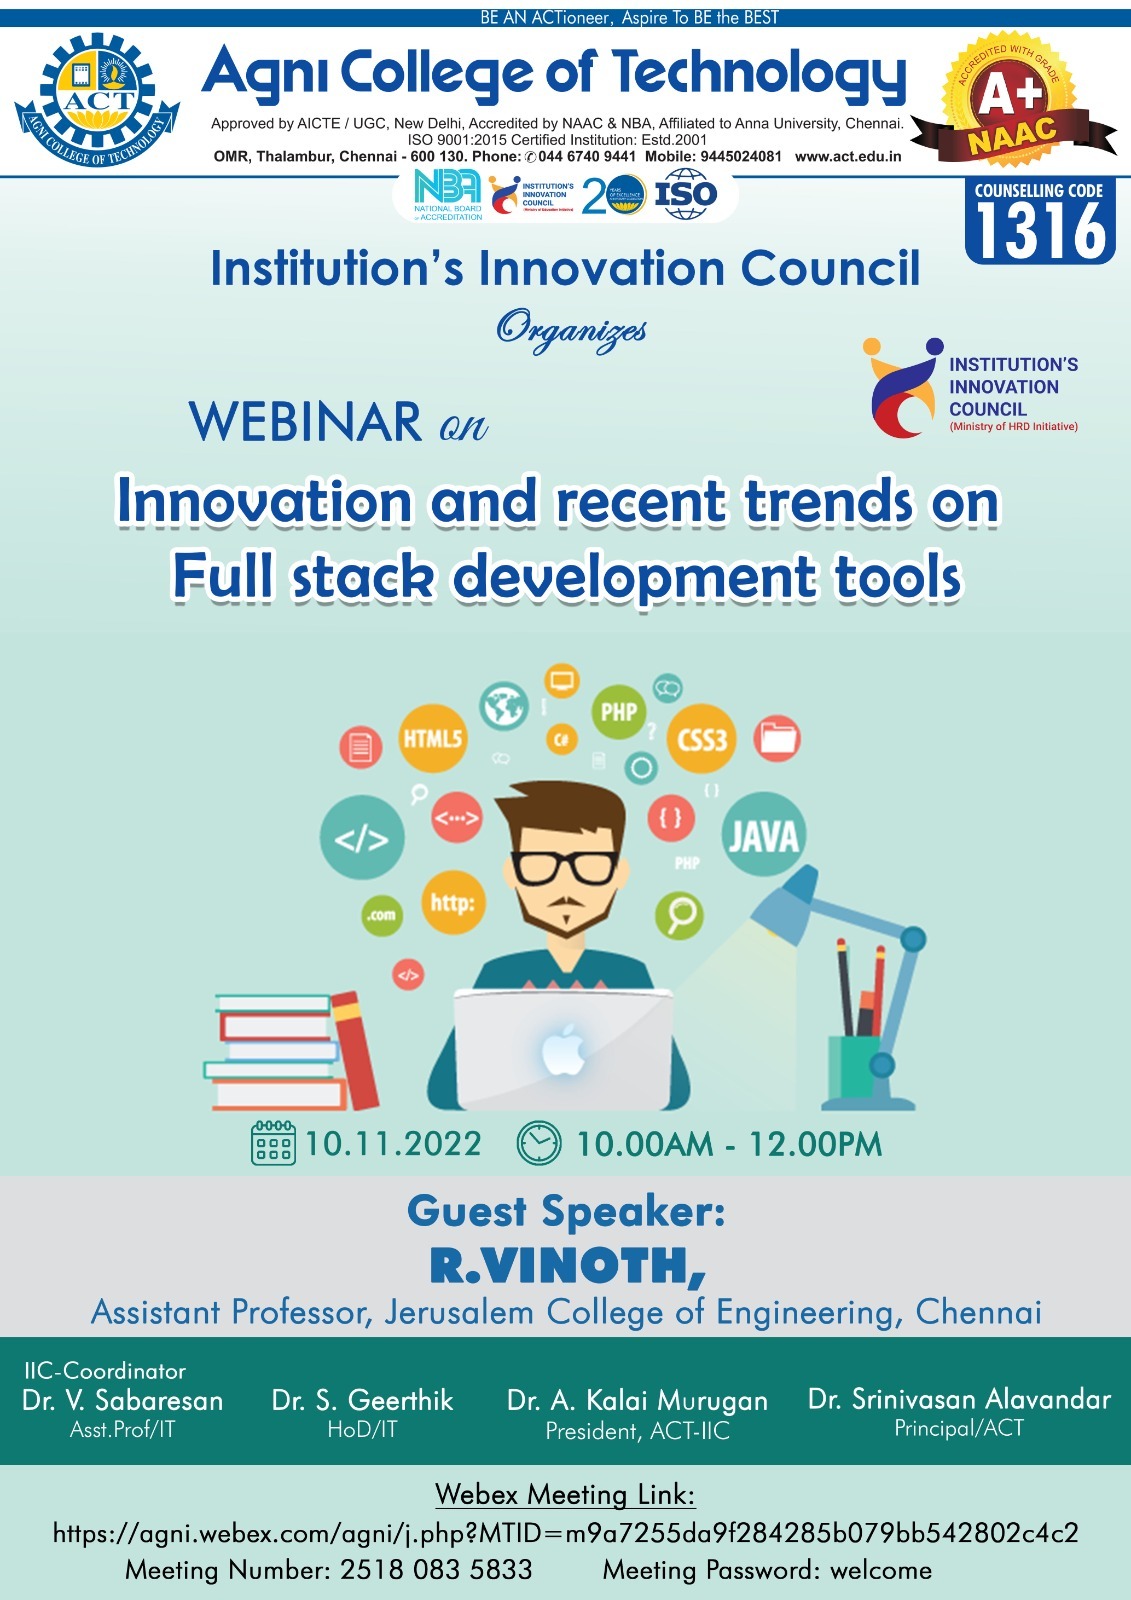 Webinar on Innovation and Recent Trends on Full stack development tools